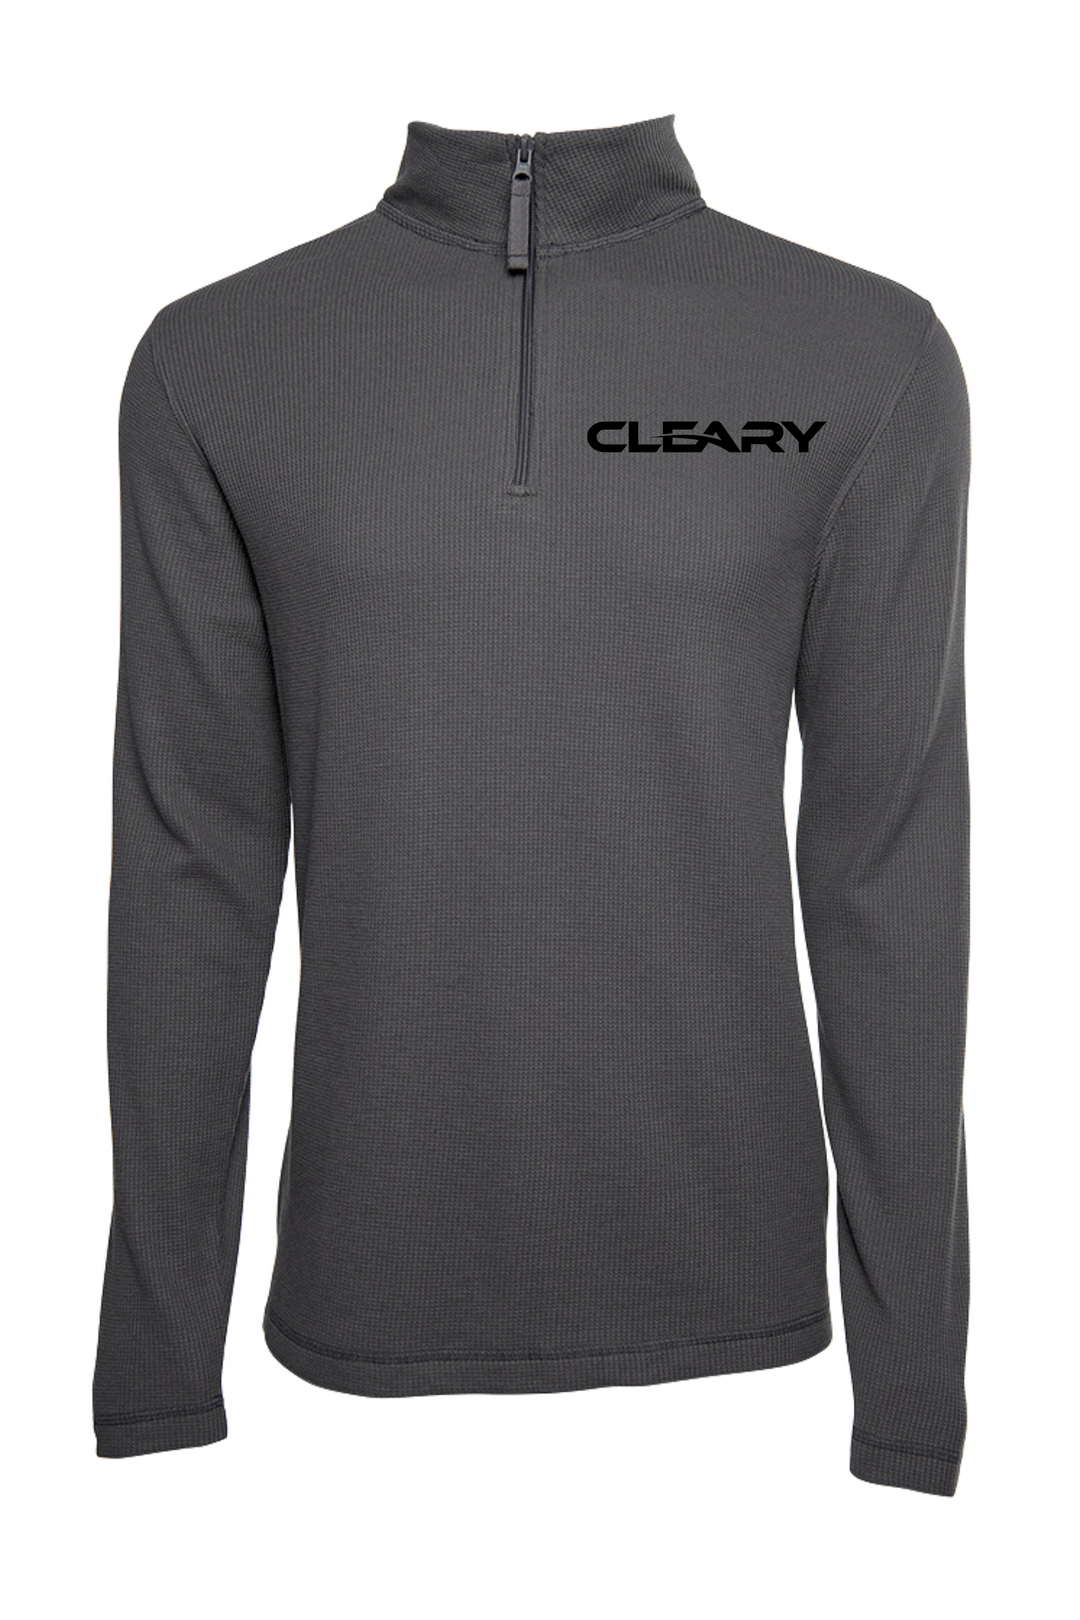 Cleary's Men's Waffle Quarter Zip Pullover Charcoal Grey